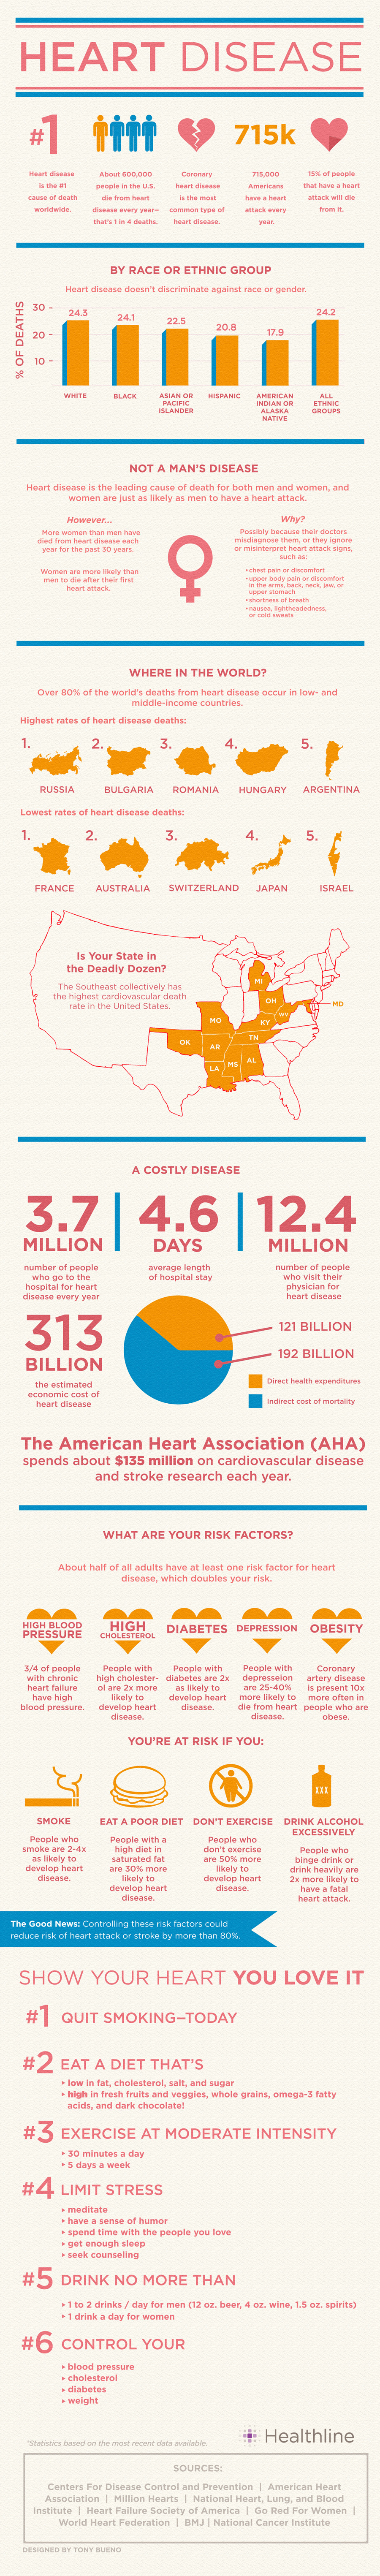 Heart disease: By the numbers